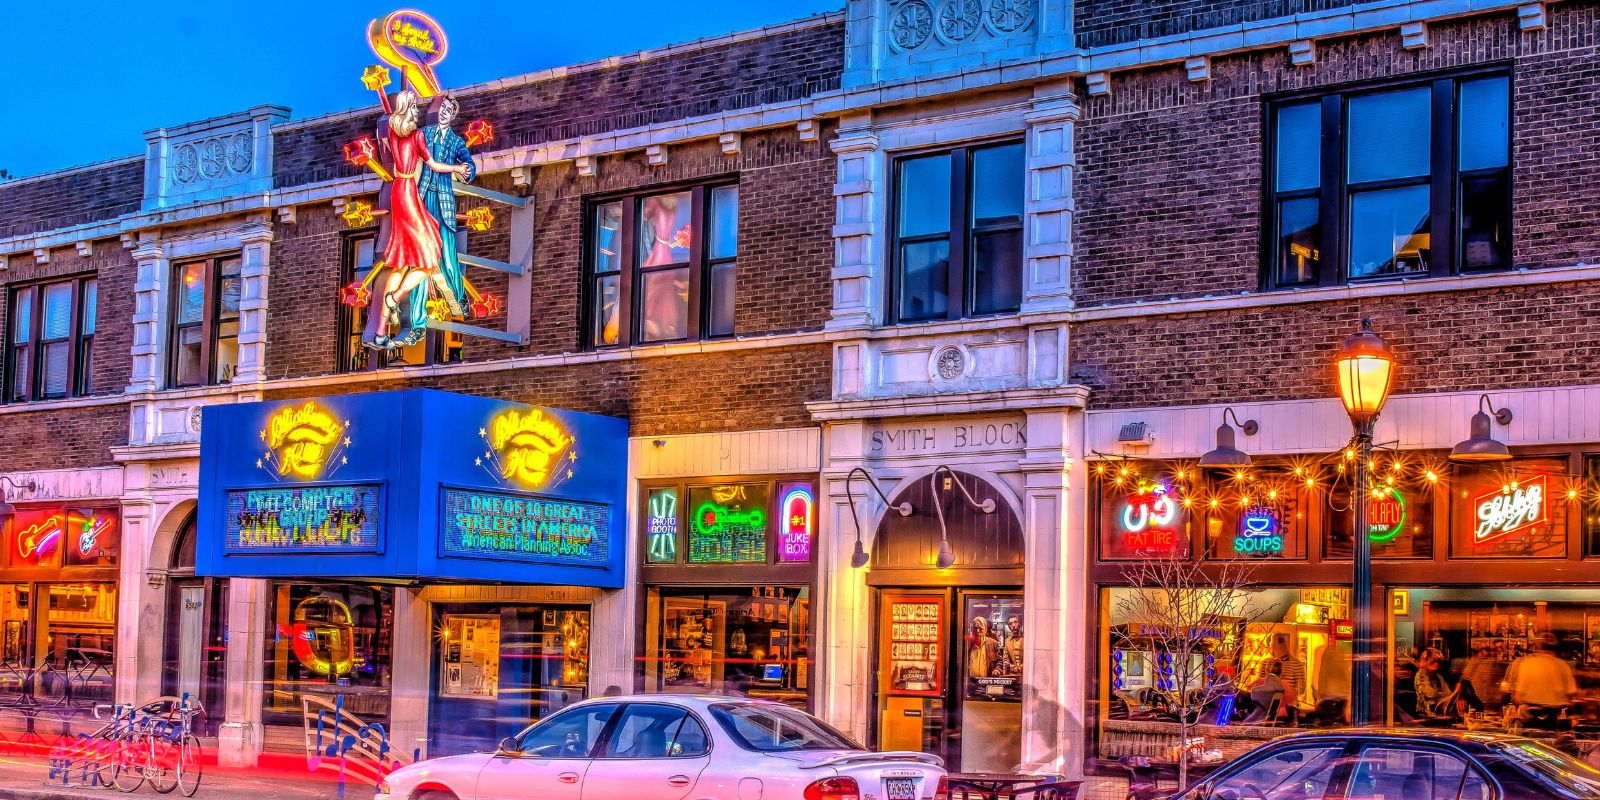 As the sun sets, neon signs light up the Delmar Loop and its businesses, including Blueberry Hill.